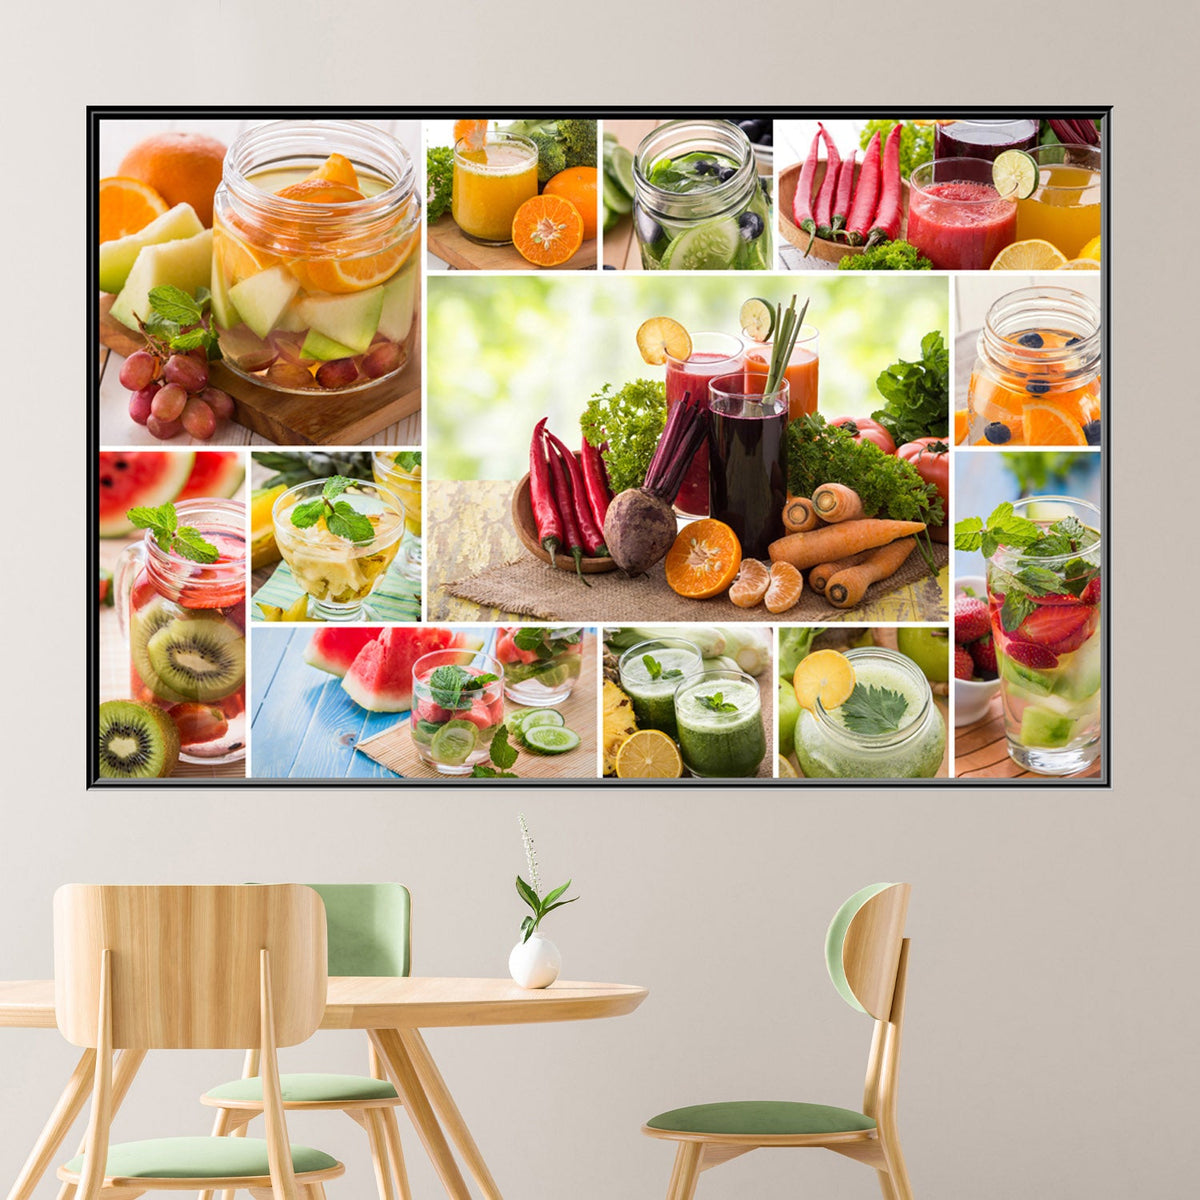 https://cdn.shopify.com/s/files/1/0387/9986/8044/products/InfusedWaterCollageCanvasArtprintFloatingFrame-2.jpg